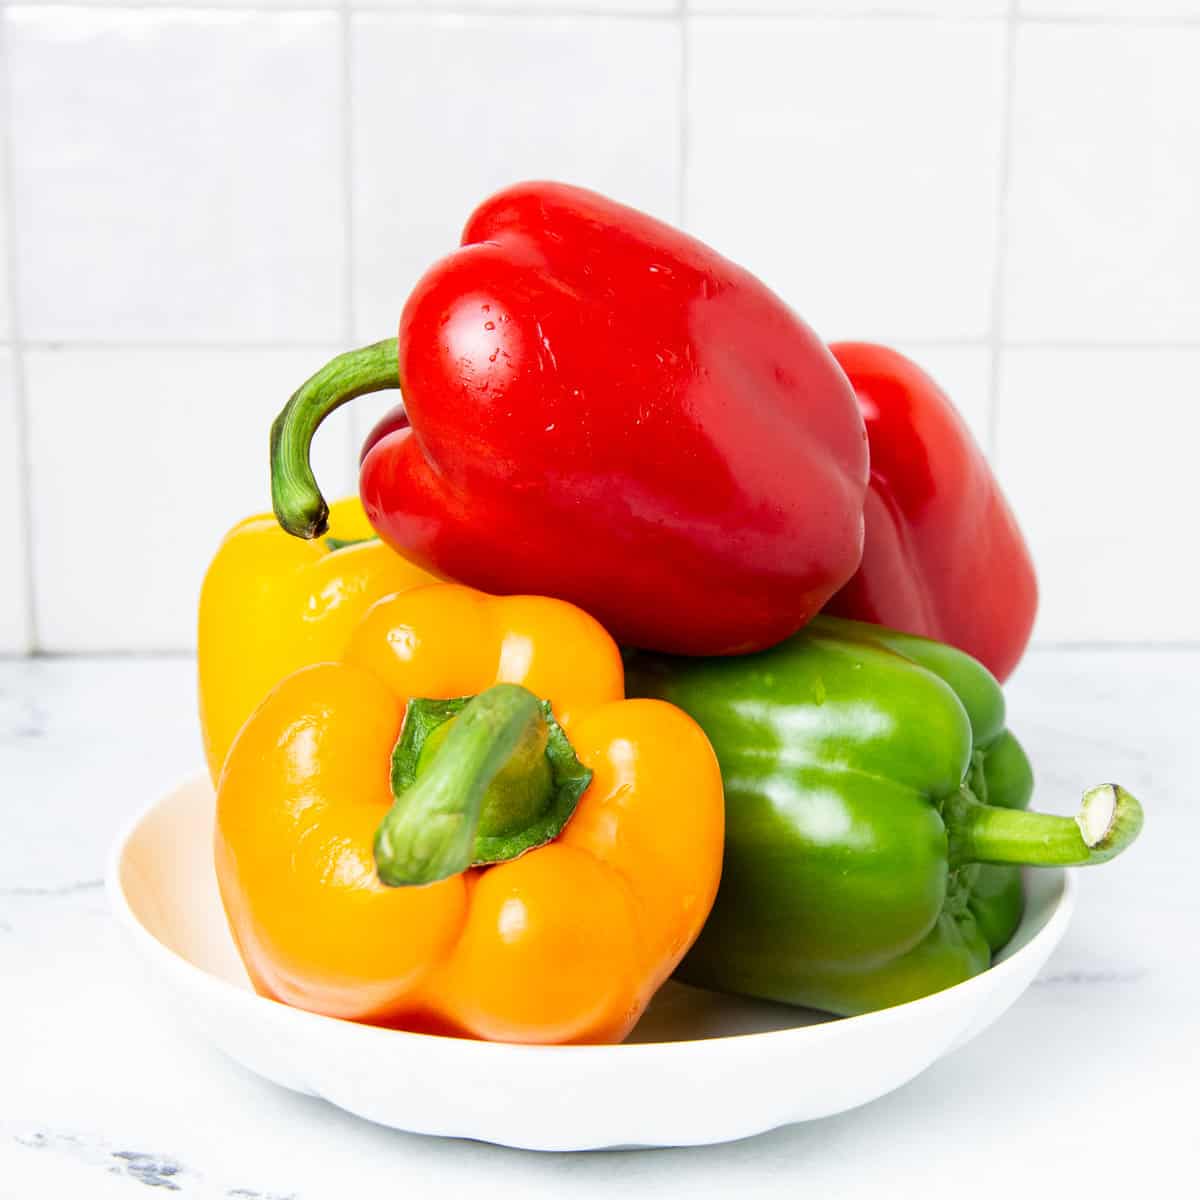 Bell peppers in a white plate on a kitchen counter.